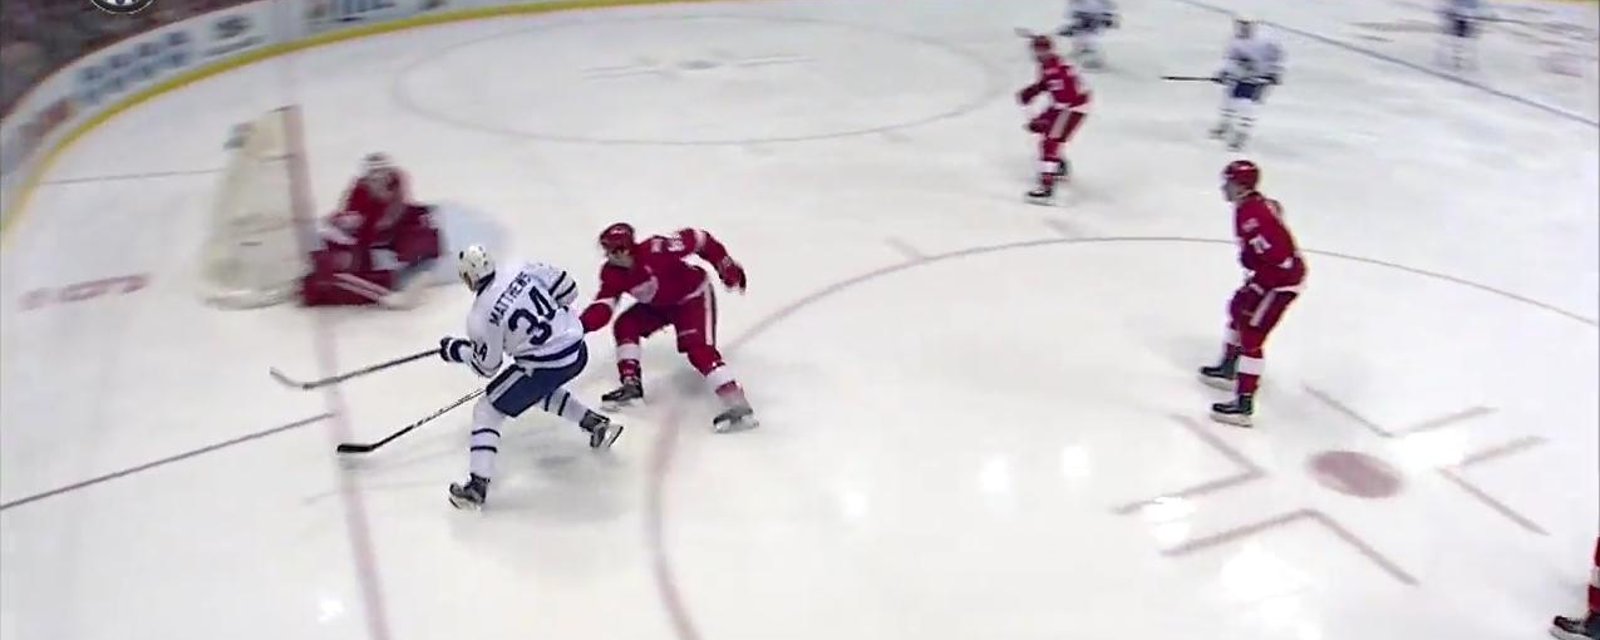 Matthews scores in weird angle, looks so easy. 